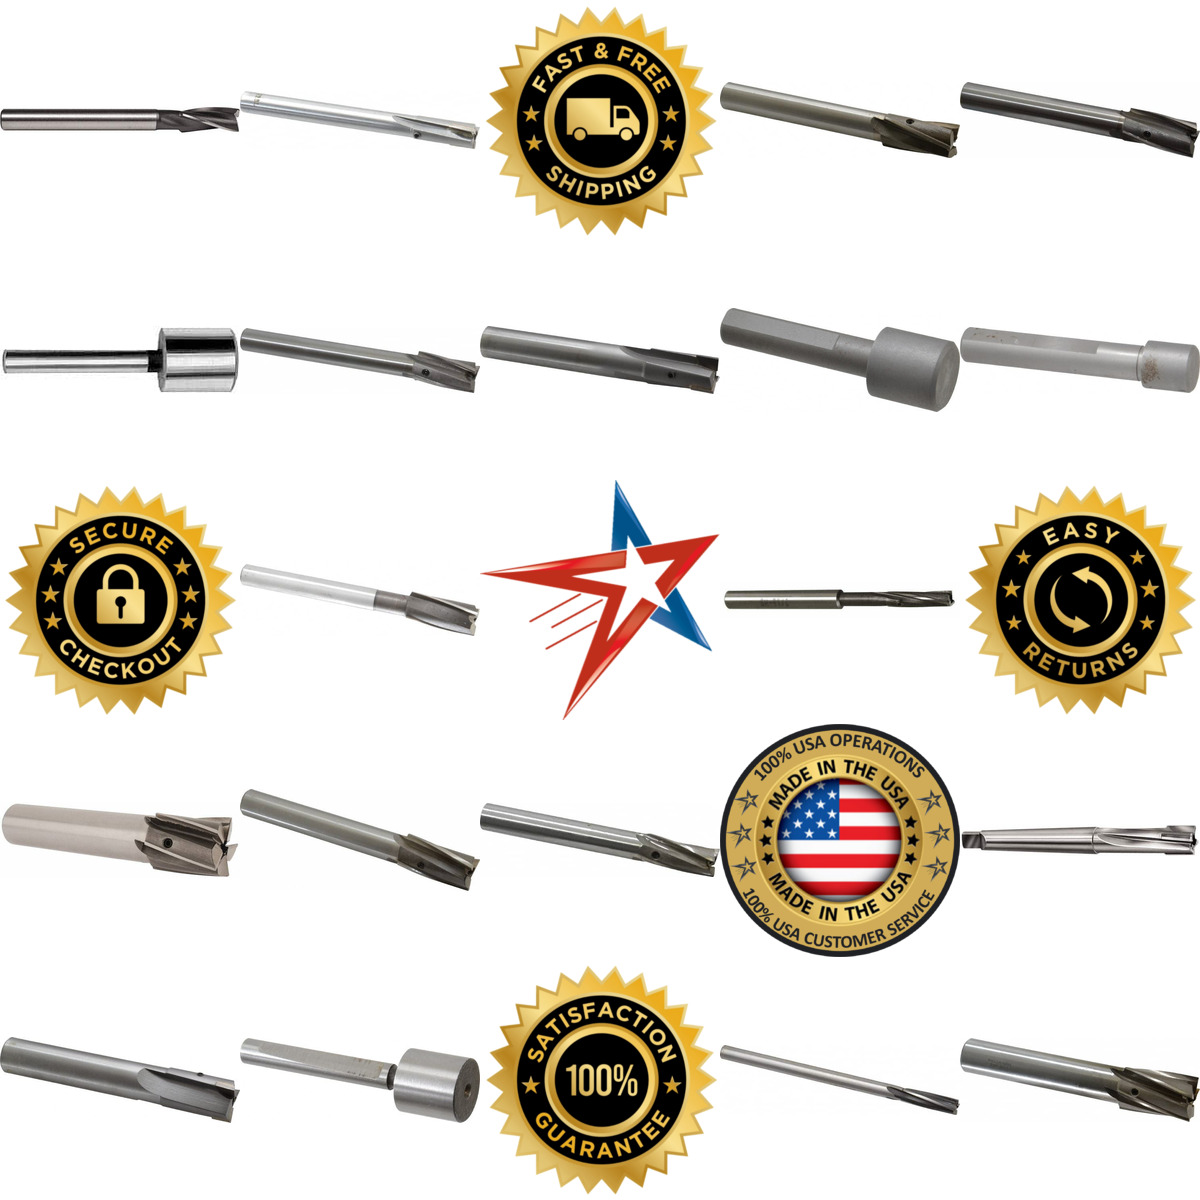 A selection of Interchangeable Pilot Counterbores and Counterbore Pilots products on GoVets